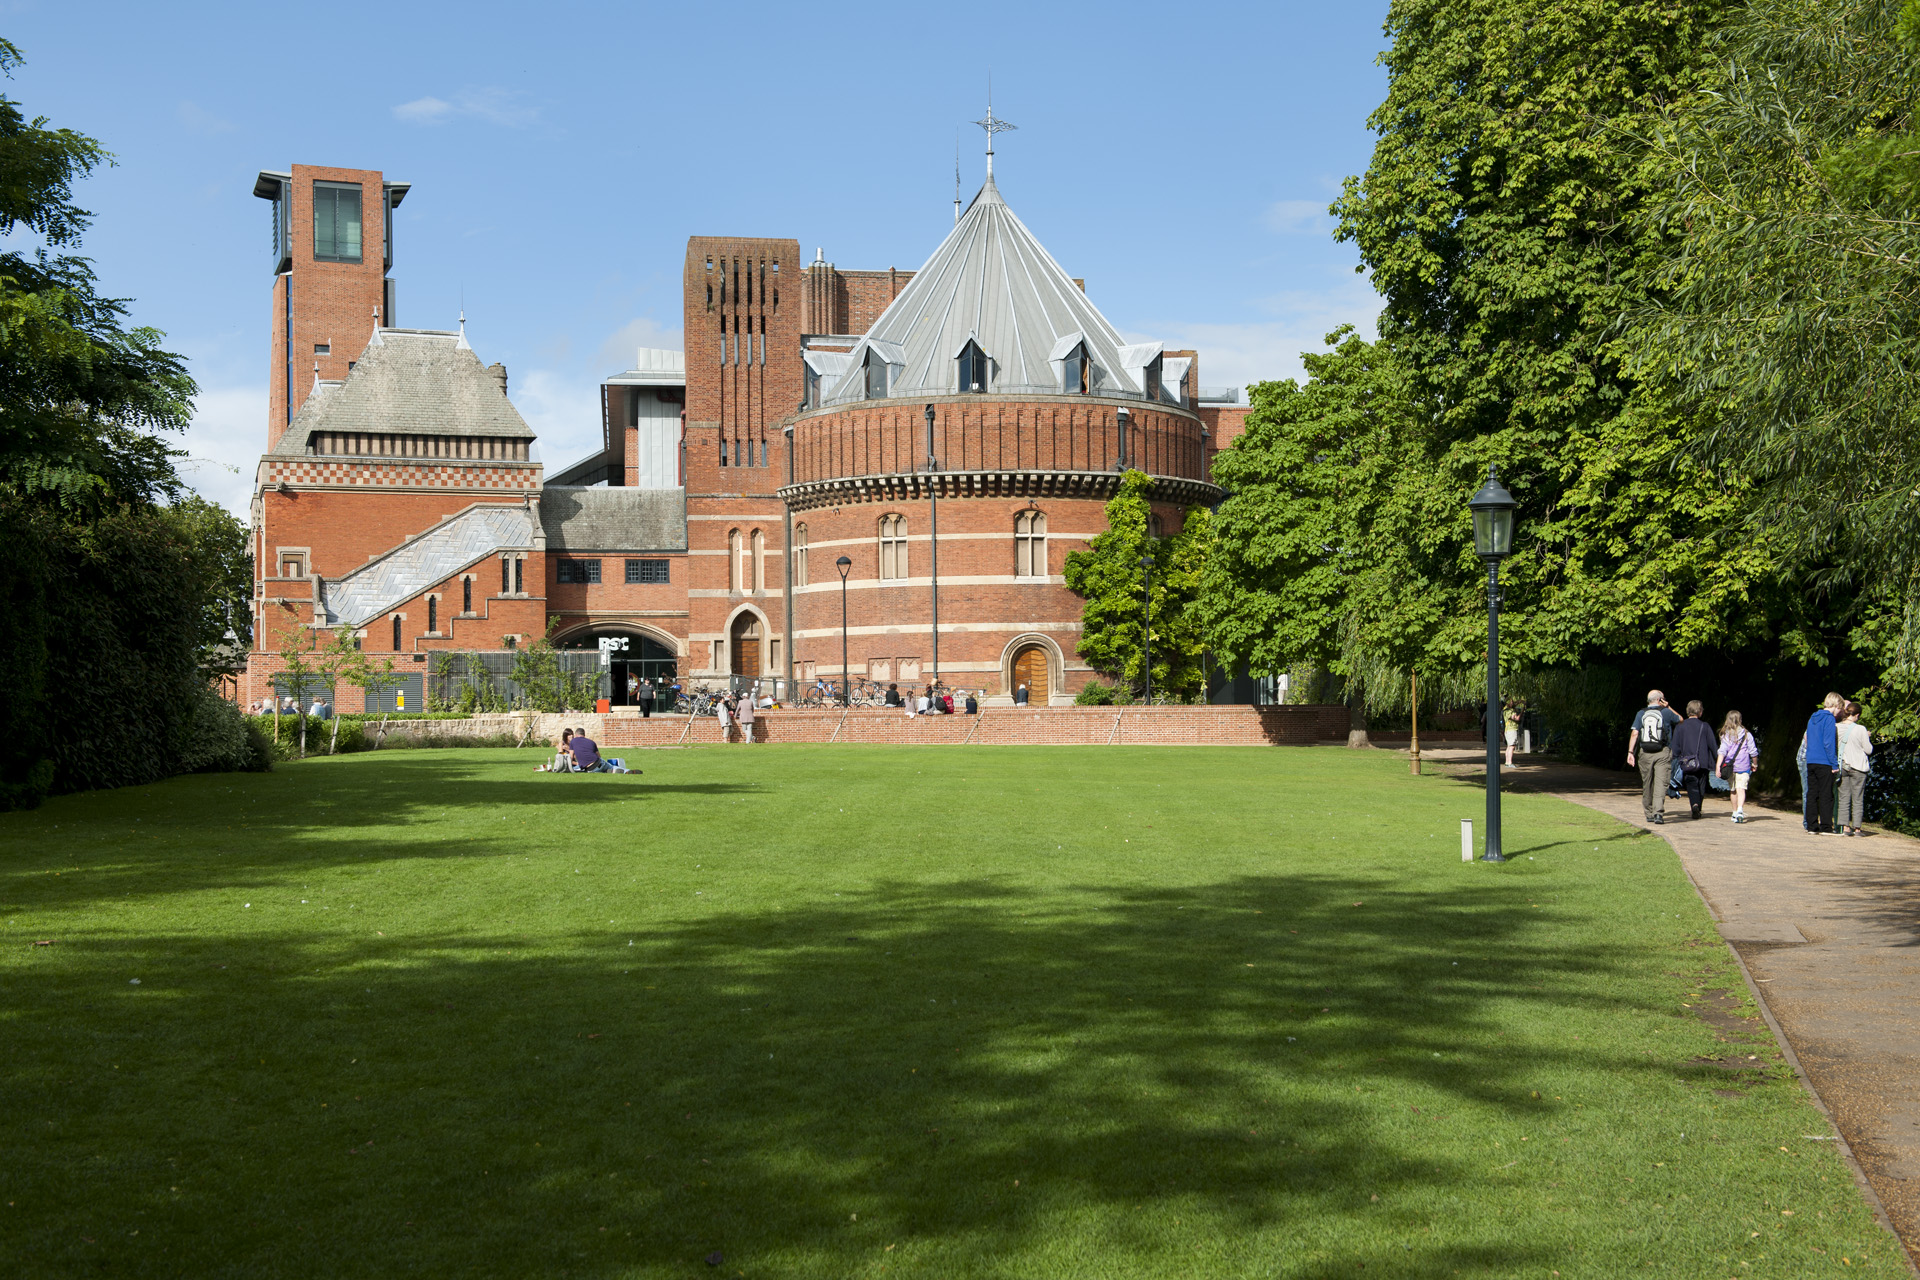 View to the Royal Shakespeare Theatre, Stratford-upon-Avon, from the south-west.